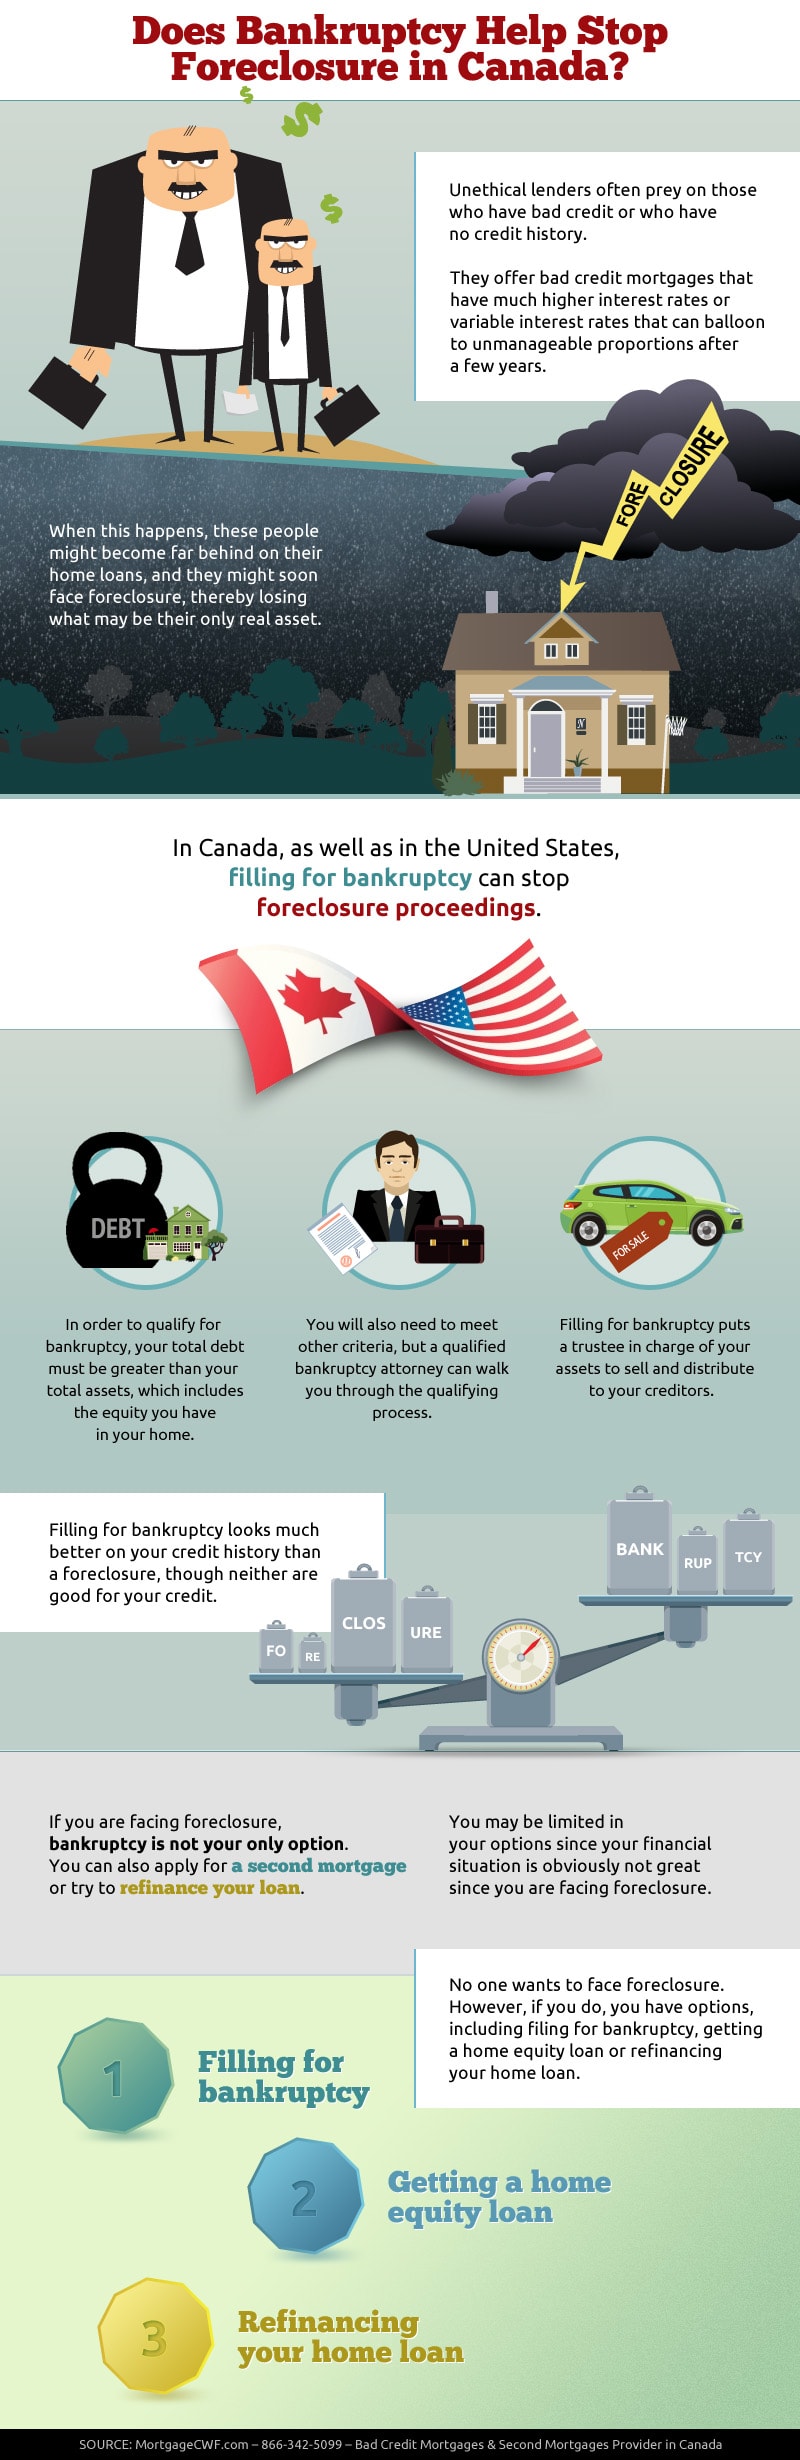 Does Bankruptcy Help Stop Foreclosure in Canada - Infographic